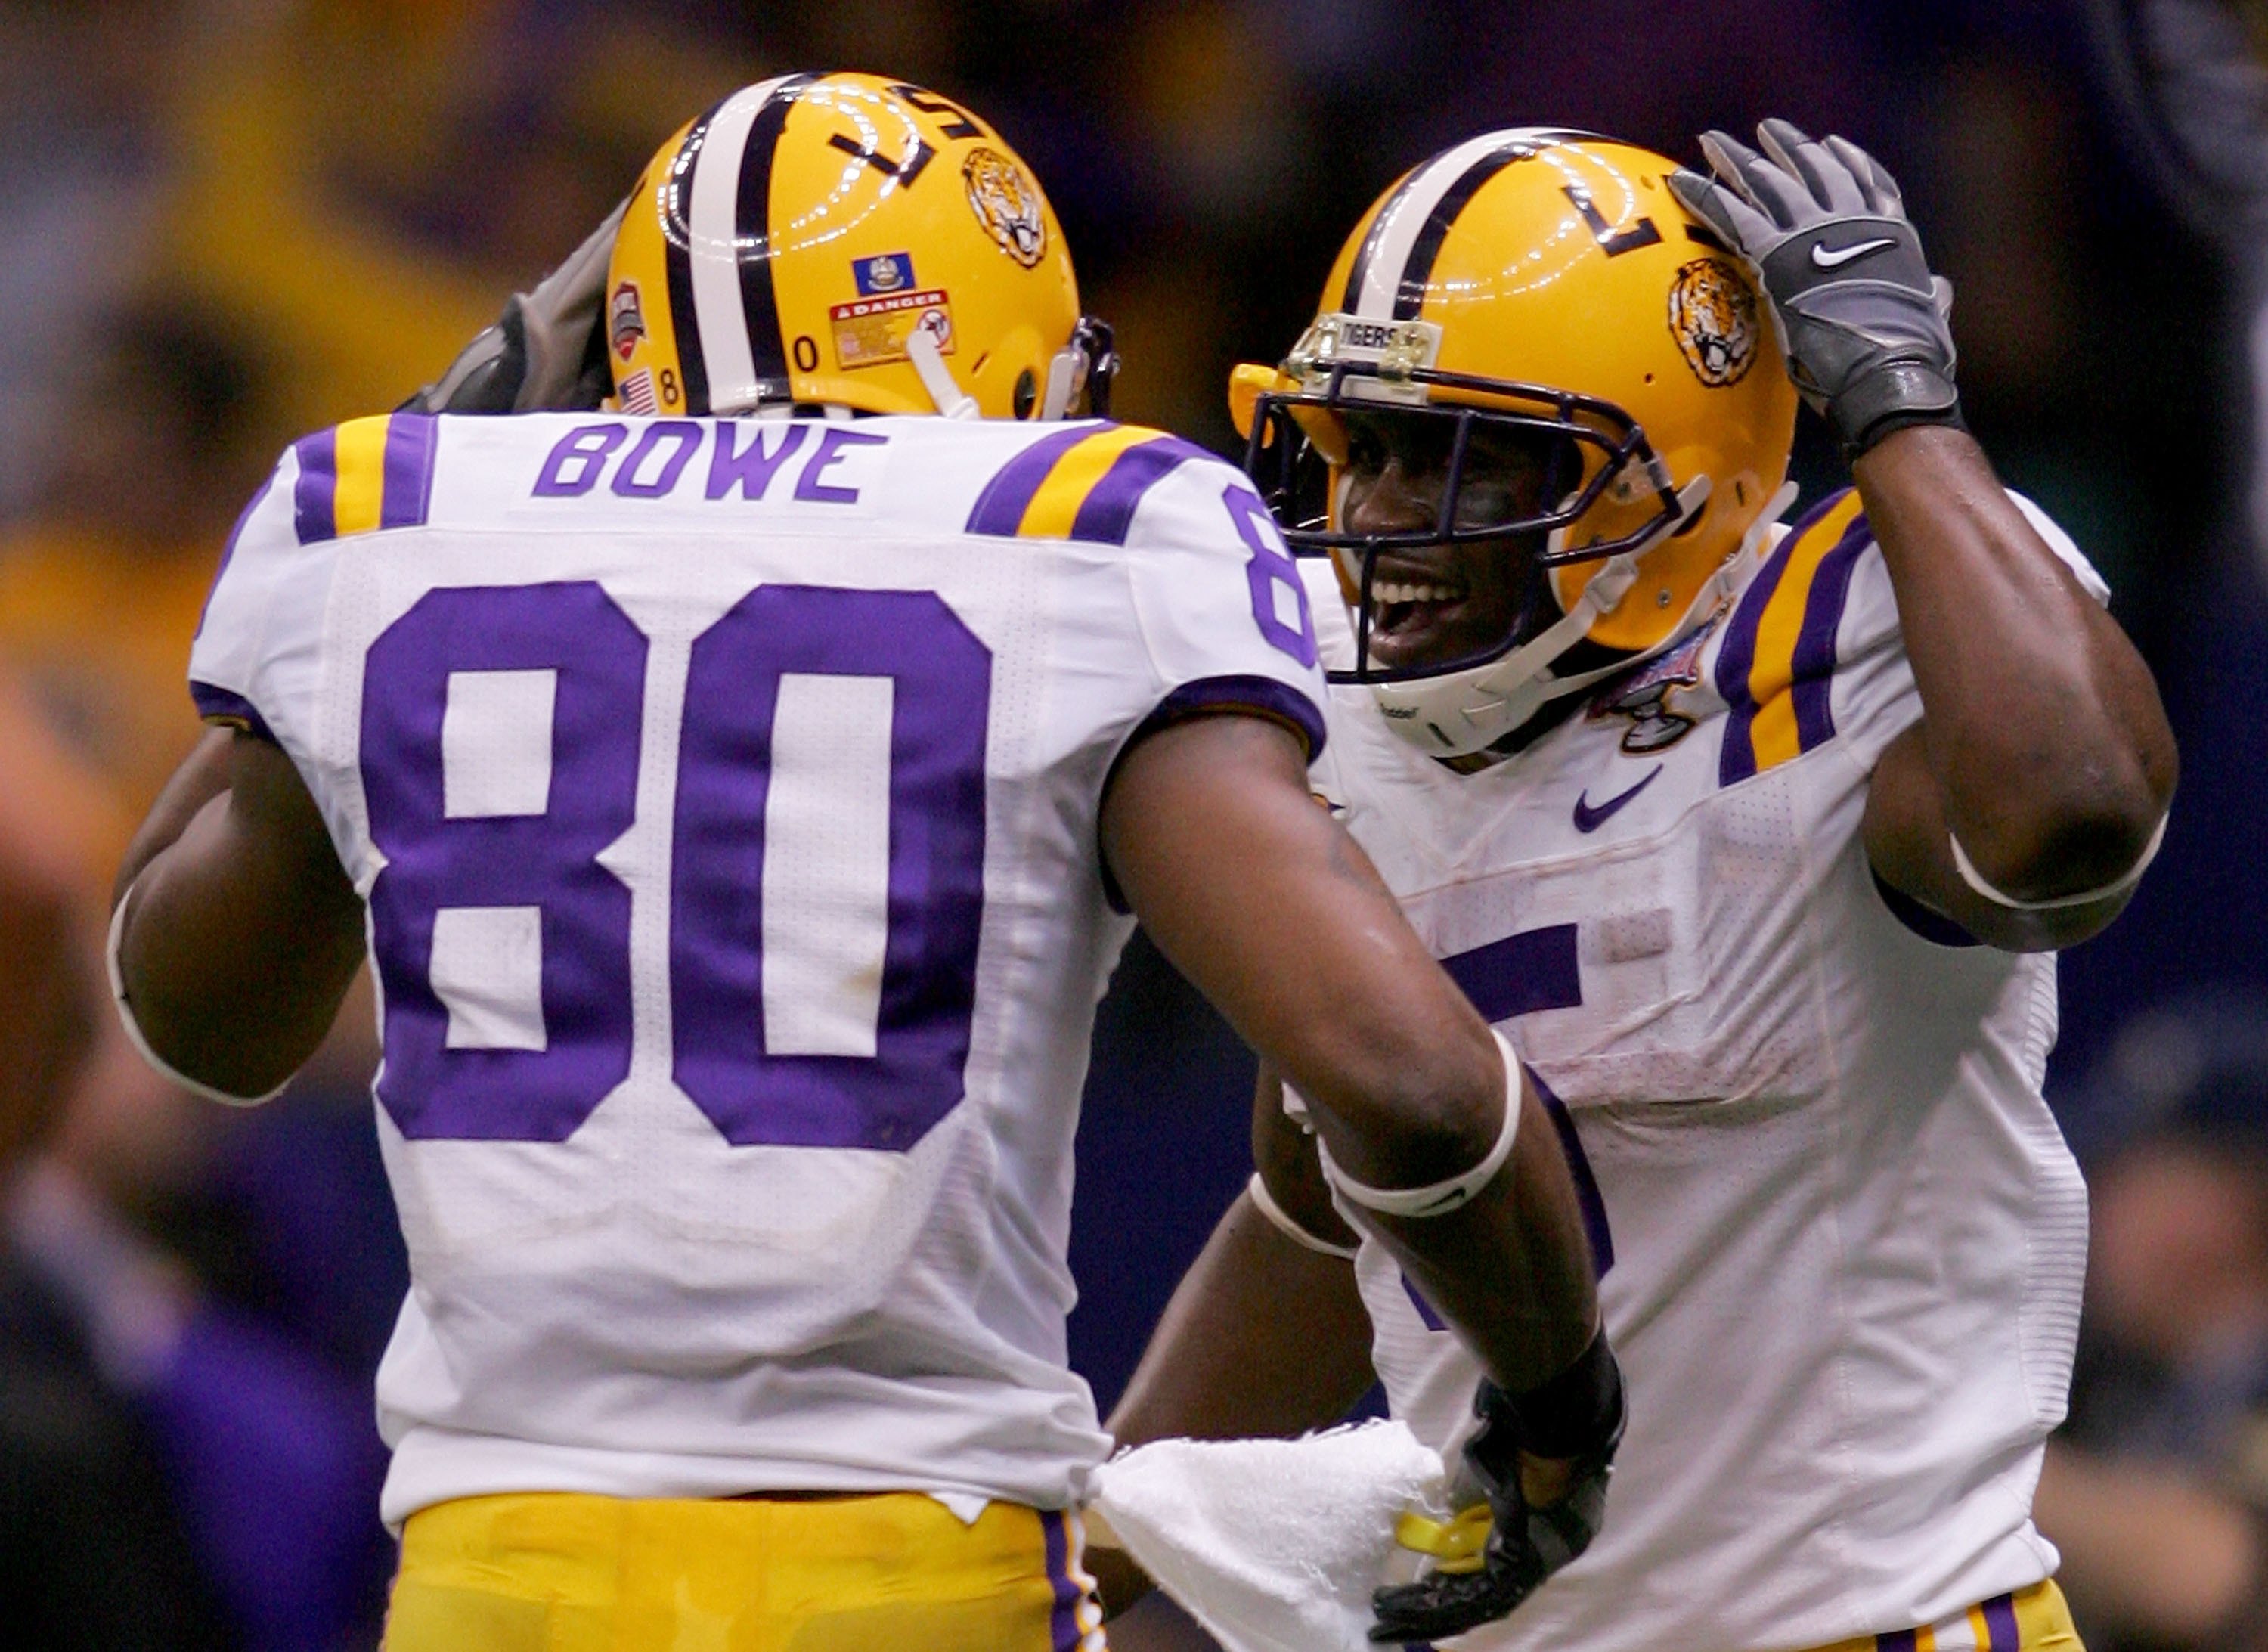 NEW ORLEANS - JANUARY 03:  Running back Keiland Williams #5 of the LSU Tigers celebrates his touchdown with teammate Dwayne Bowe #80 in the fourth quarter of the 2007 Allstate Sugar Bowl against the Notre Dame Fighting Irish on January 3, 2007 at the Supe